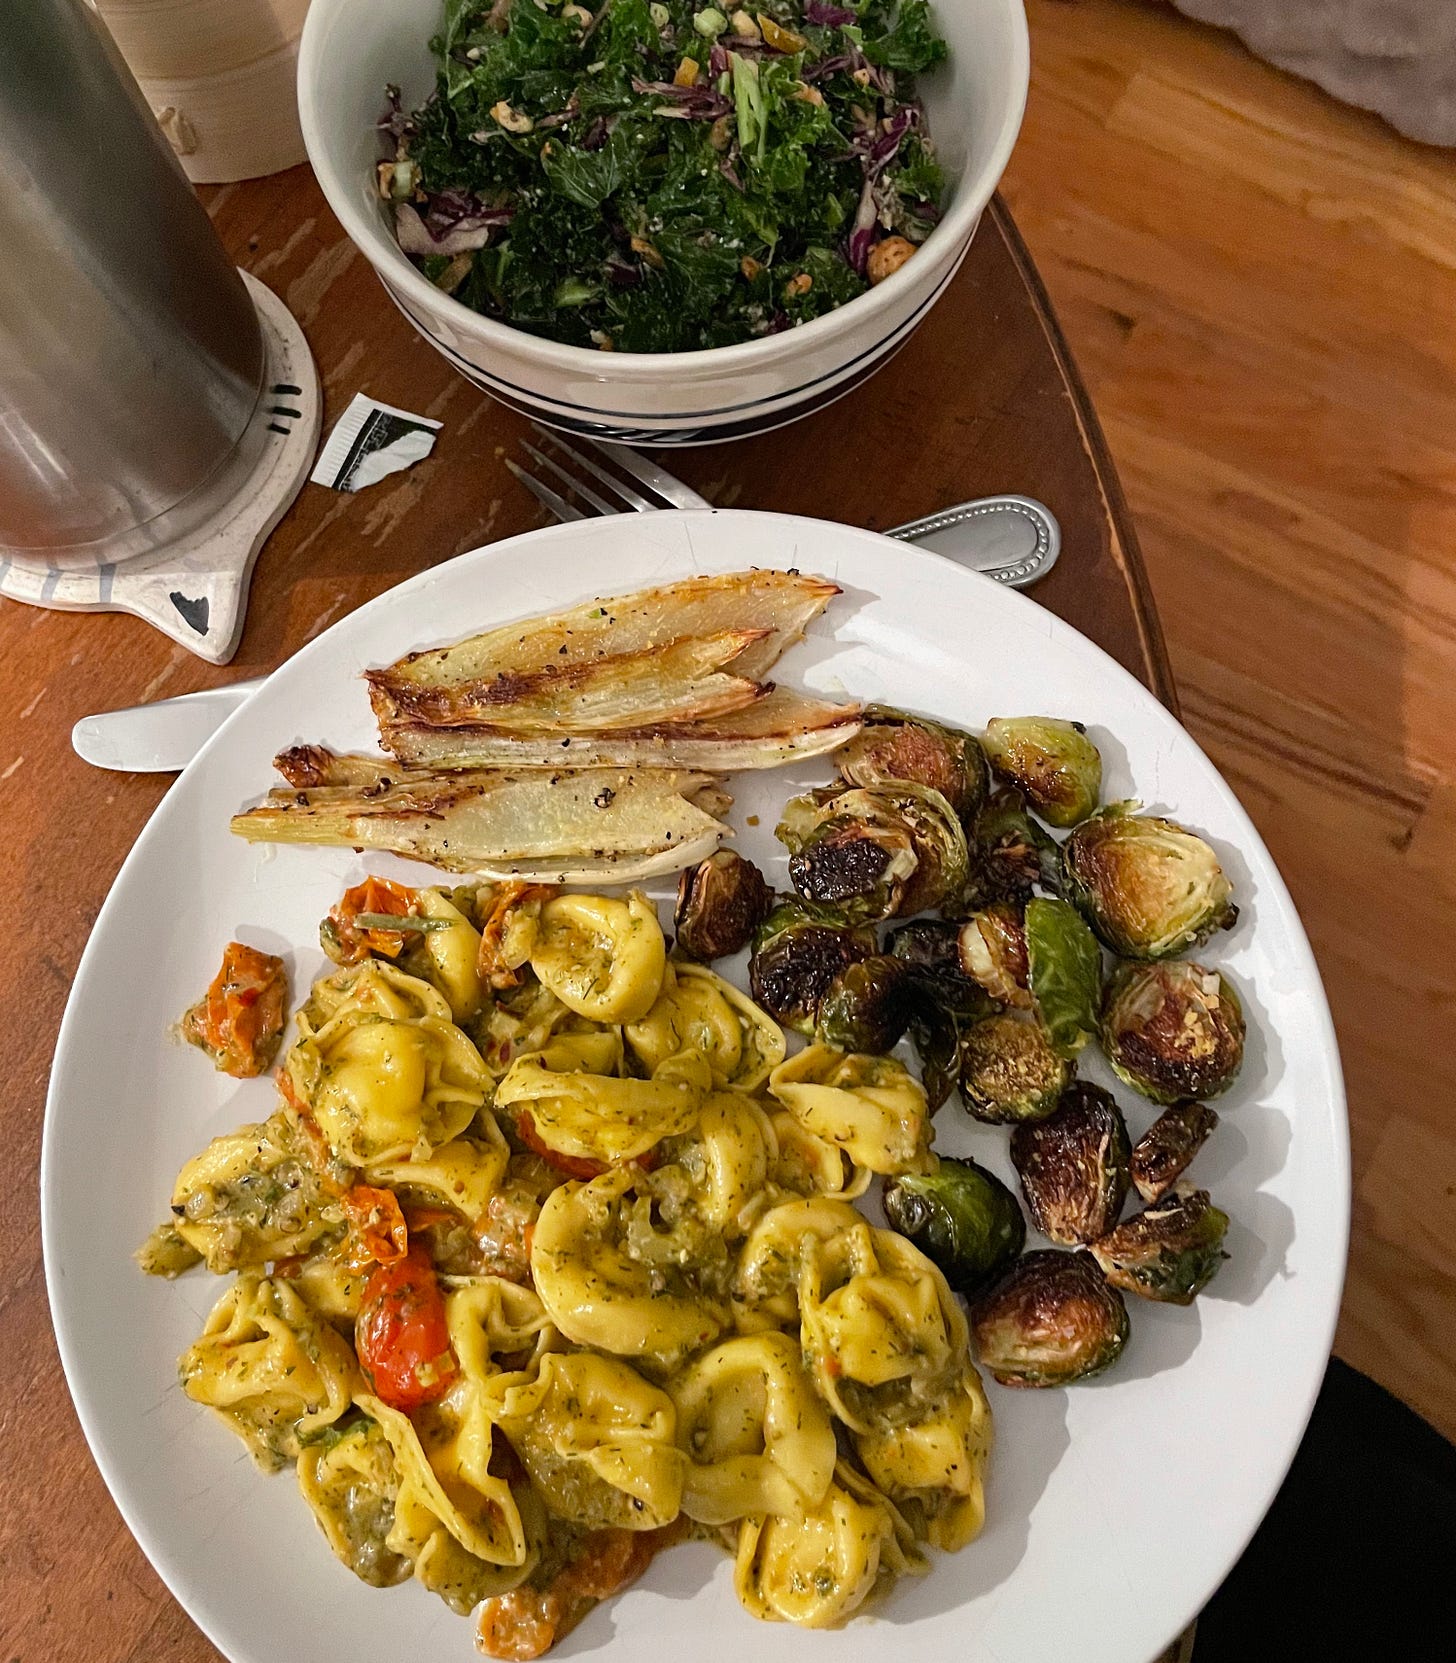 tortellini in tomato and fennel pesto sauce w kale salad and roasted fennel + brussels